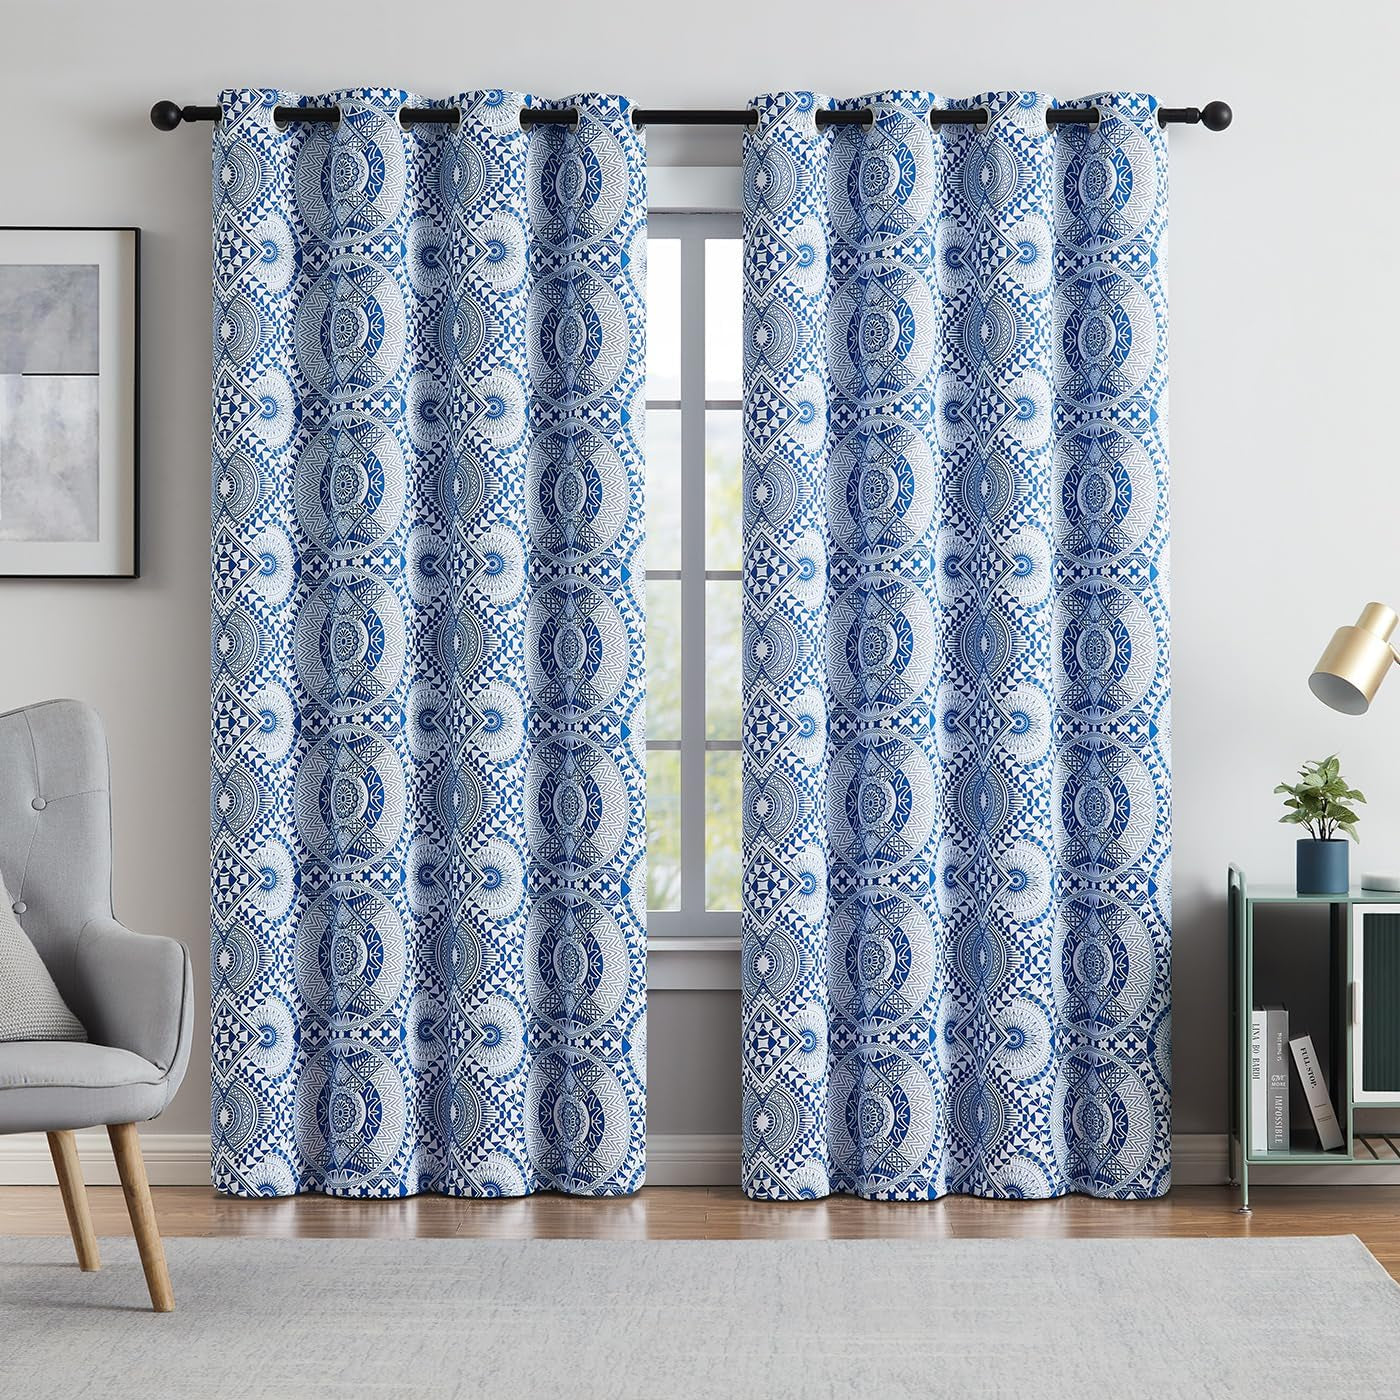 Metallic Geo Blackout Curtain Panels for Bedroom Thermal Insulated Light Blocking Foil Trellis Moroccan Window Treatments Diamond Grommet Drapes for Living-Room, Set of 2, 50" X 84", Beige/Gold  ugoutry Ethic Blue 50"X84"X2 